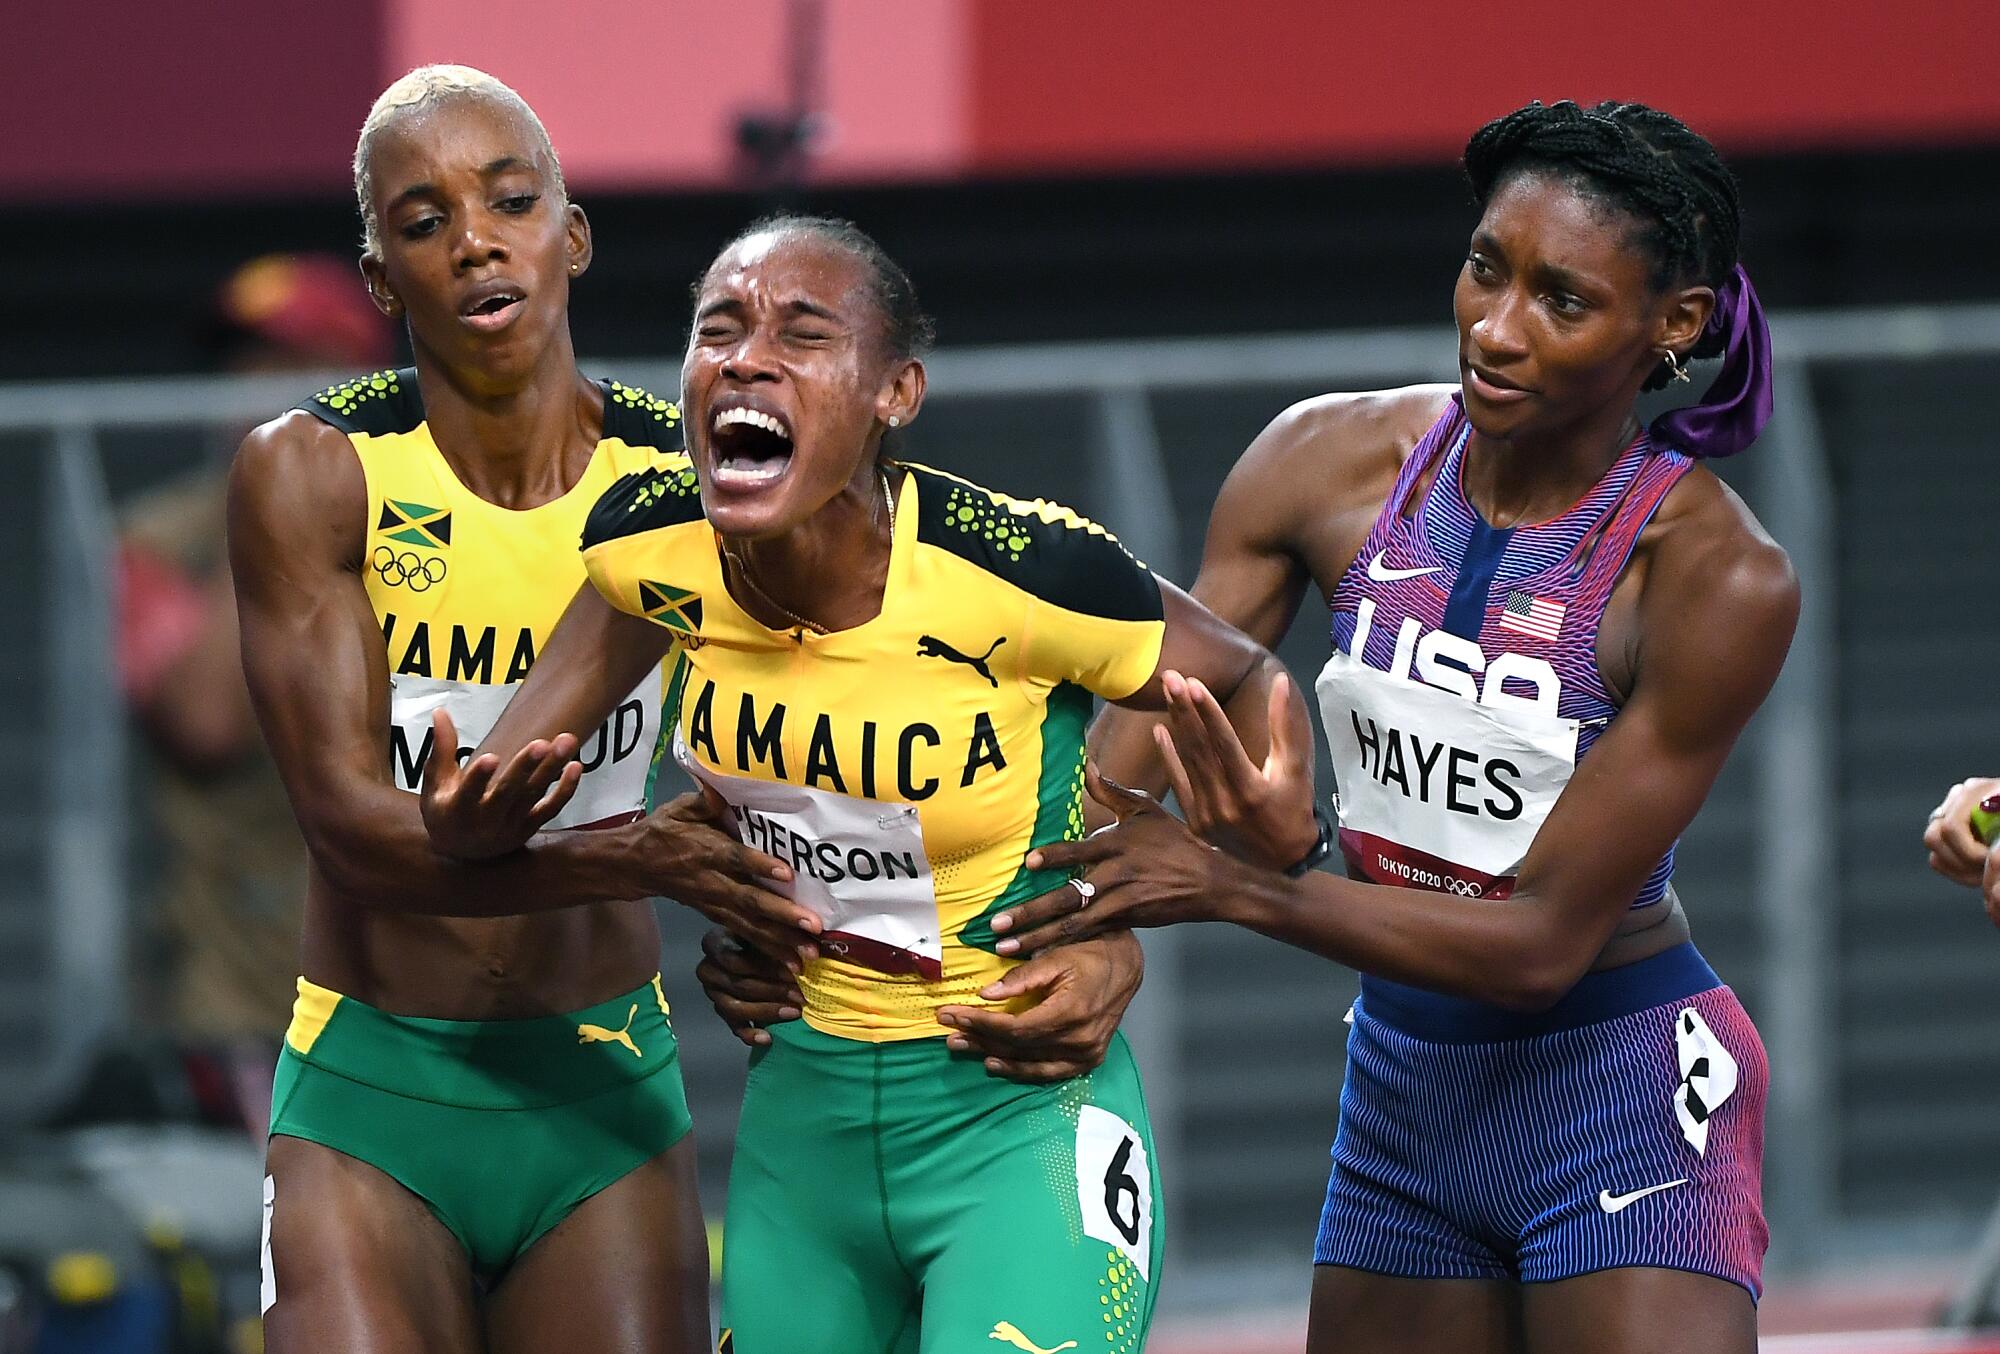 Stephanie McPherson cries out in pain as she is helped by Candice McLeod and Quanera Hayes after the 400 meters.